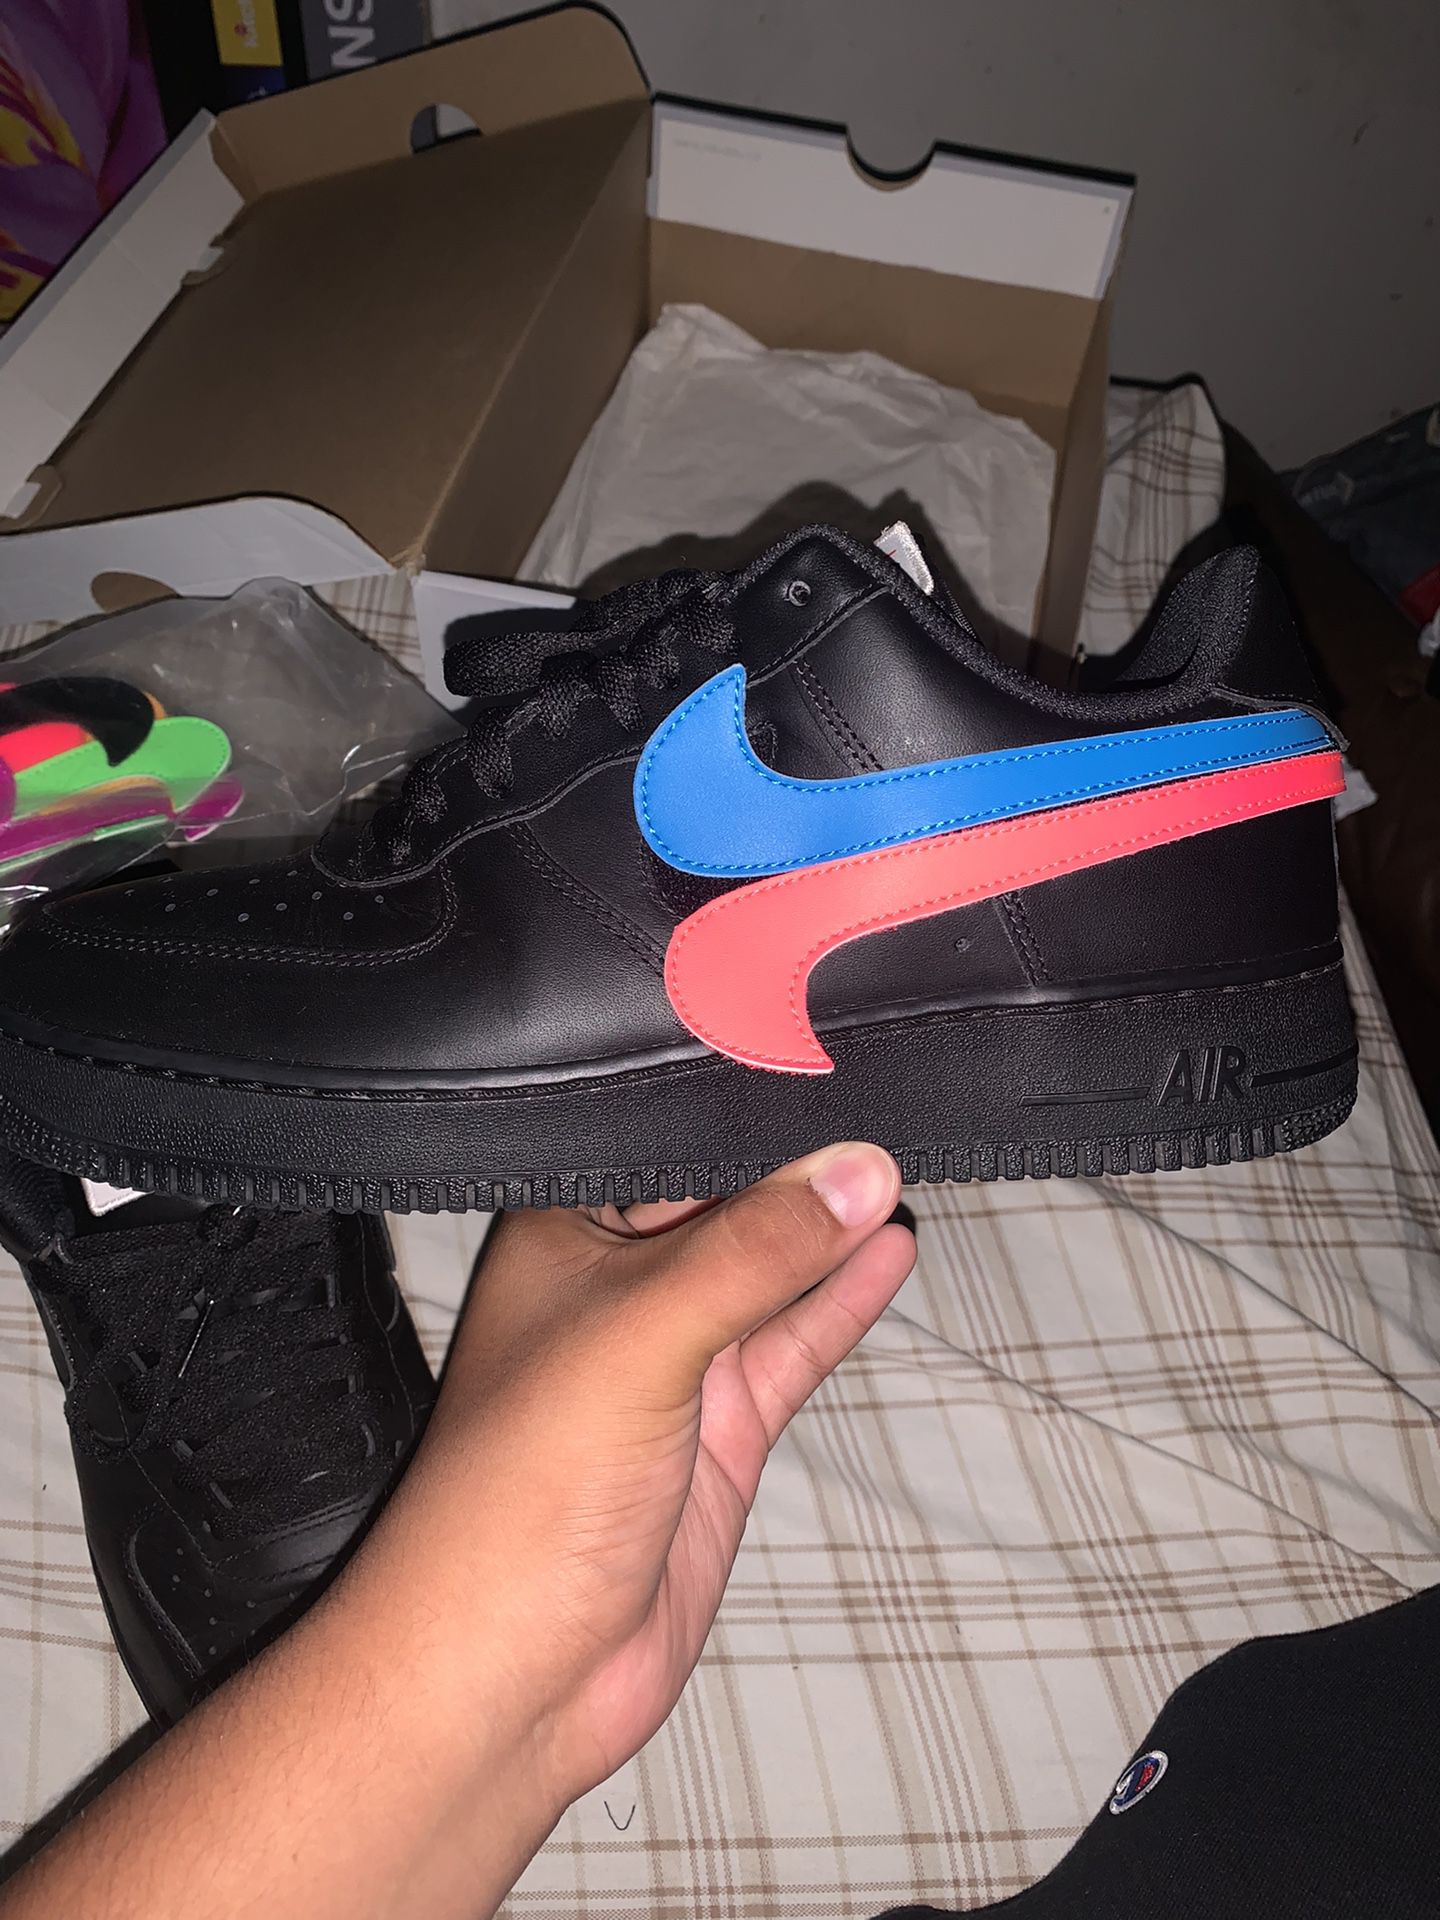 Nike Air force 1 Low Swoosh Pack - Black Colorway OFFERS ACCEPTED for Sale in West Haven, CT OfferUp